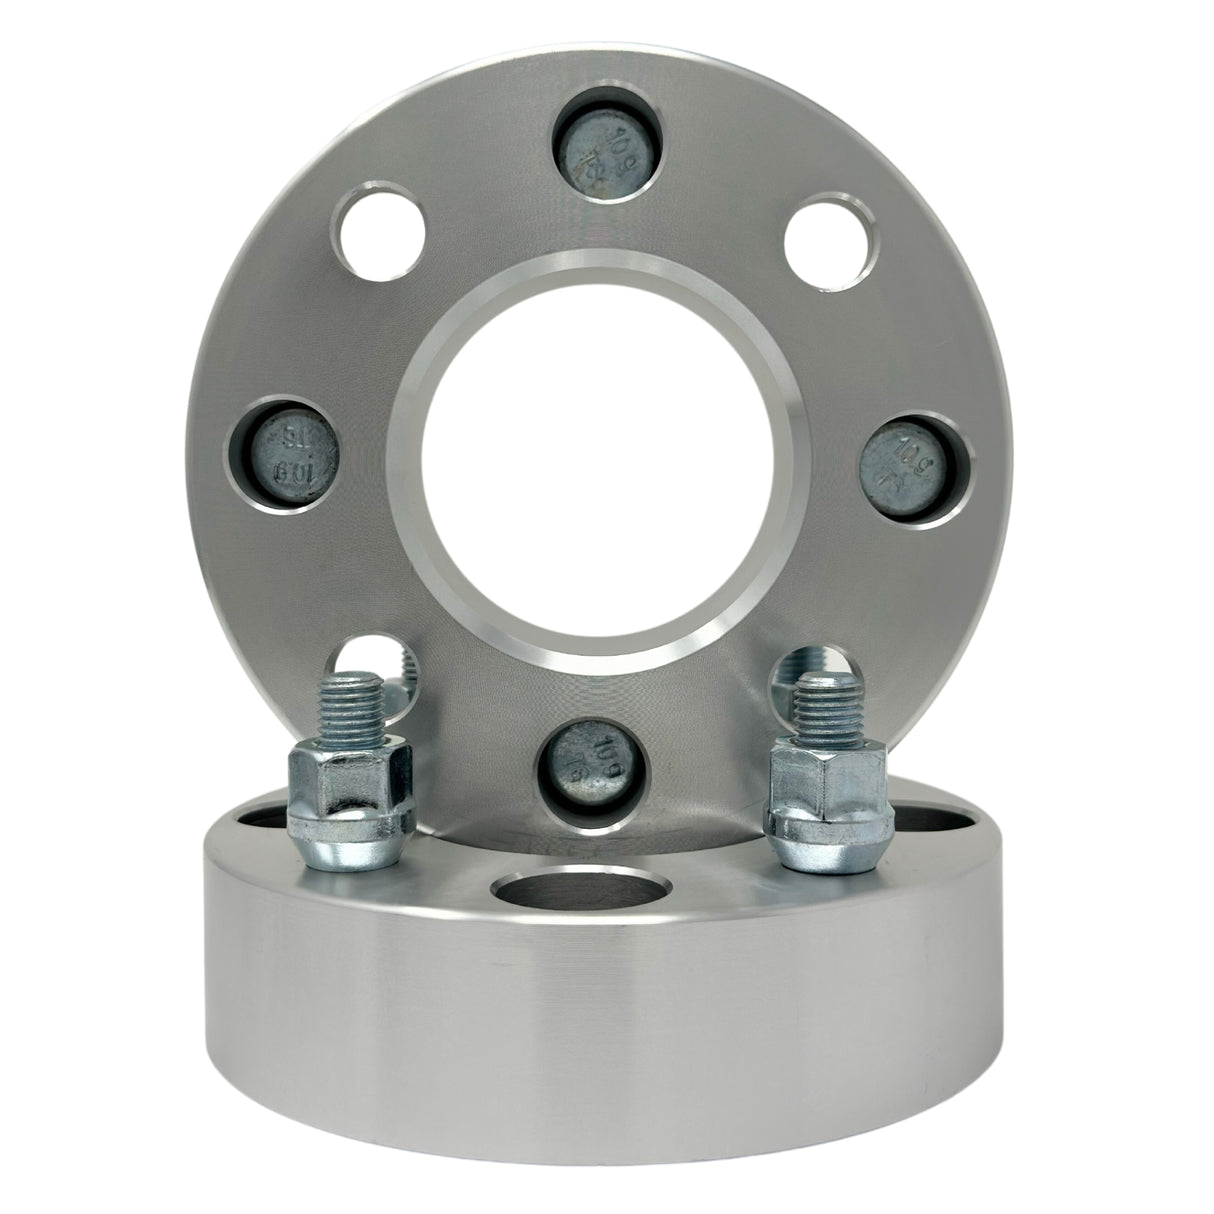 4x114.3 Also known as 4x4.5 Wheel Spacers 1" Inch or 1.25" Inch or 1.5" Inch Thicknesses (25mm - 38mm) 12x1.5 Studs & Lug Nuts 71mm Center Bore For All 4x114.3 or 4x4.5 Vehicle Hub Clearance